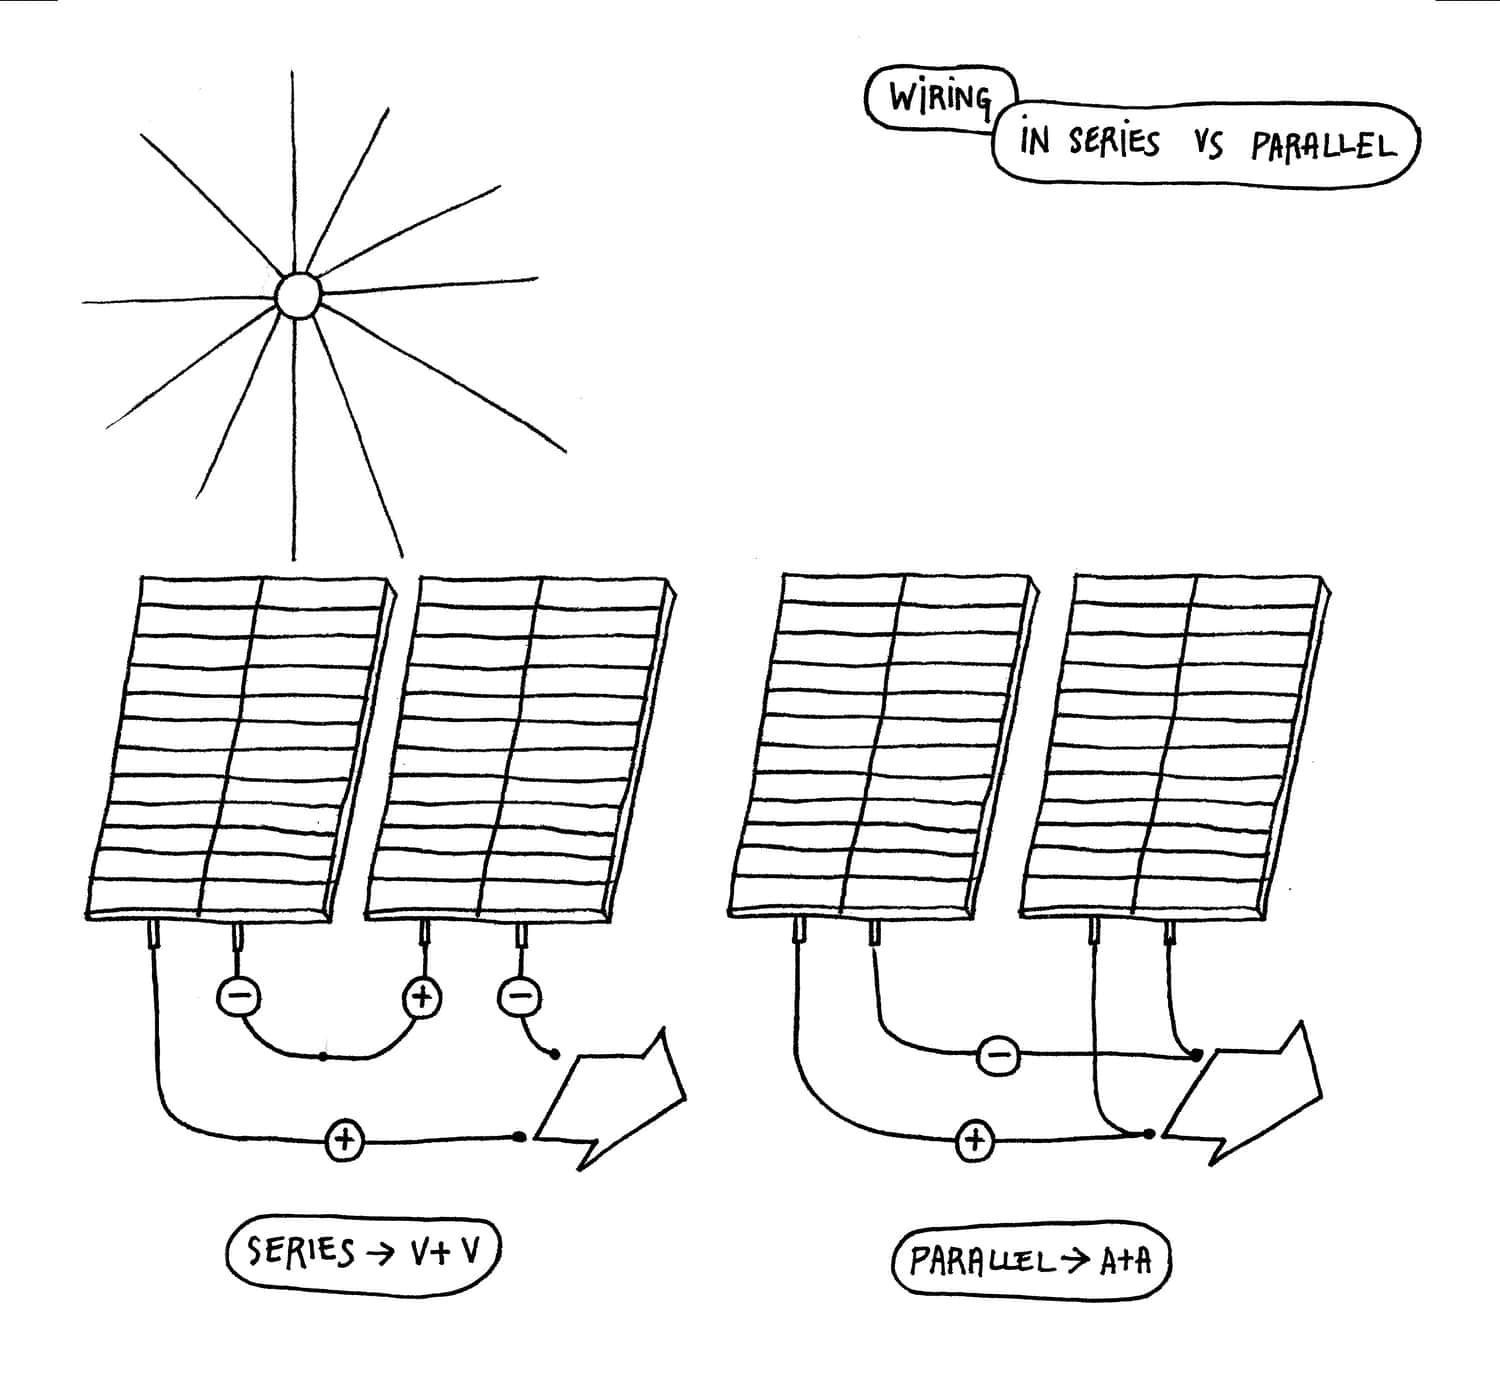 Illustration for a guide on solar power for Low-tech Magazine